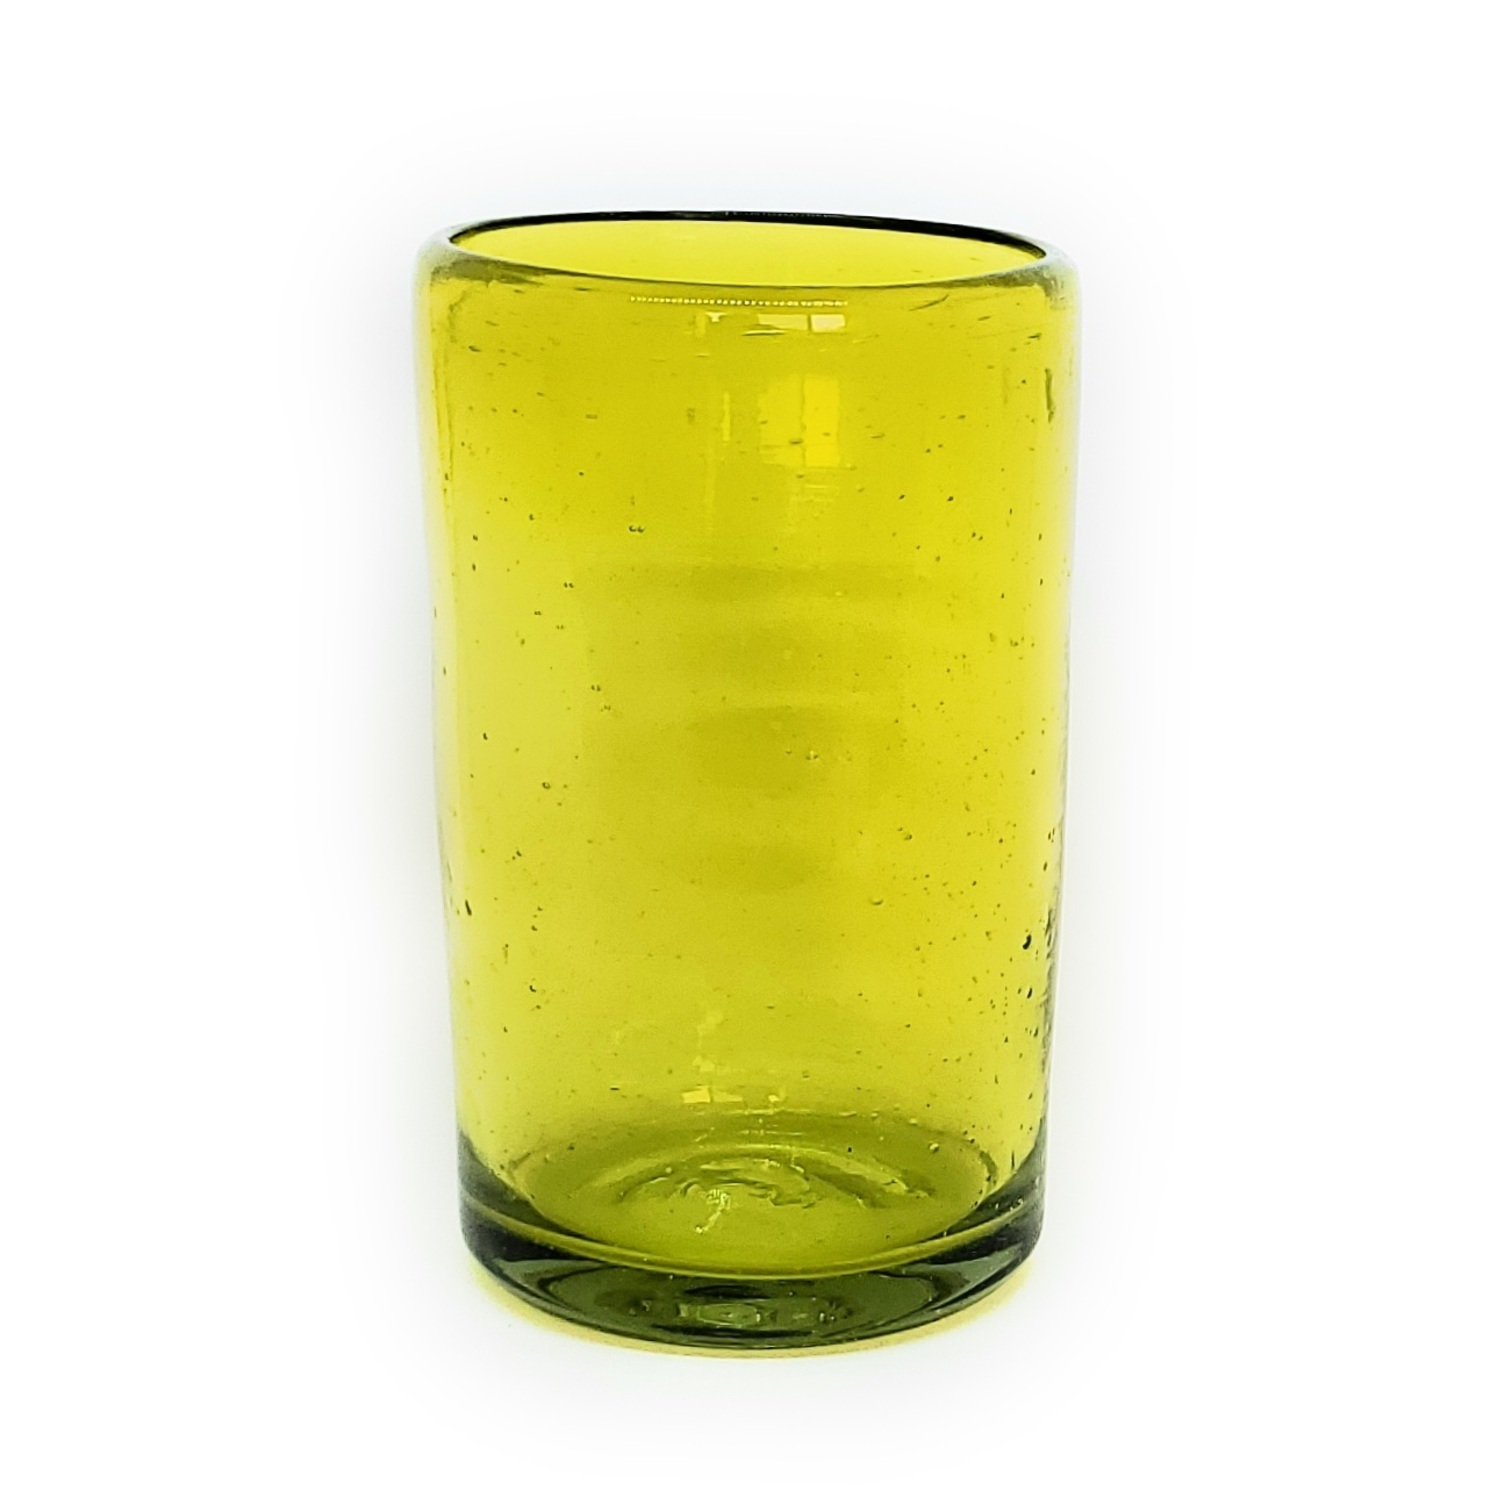 Wholesale Mexican Glasses / Solid Yellow 14 oz Drinking Glasses  / These handcrafted glasses deliver a classic touch to your favorite drink.